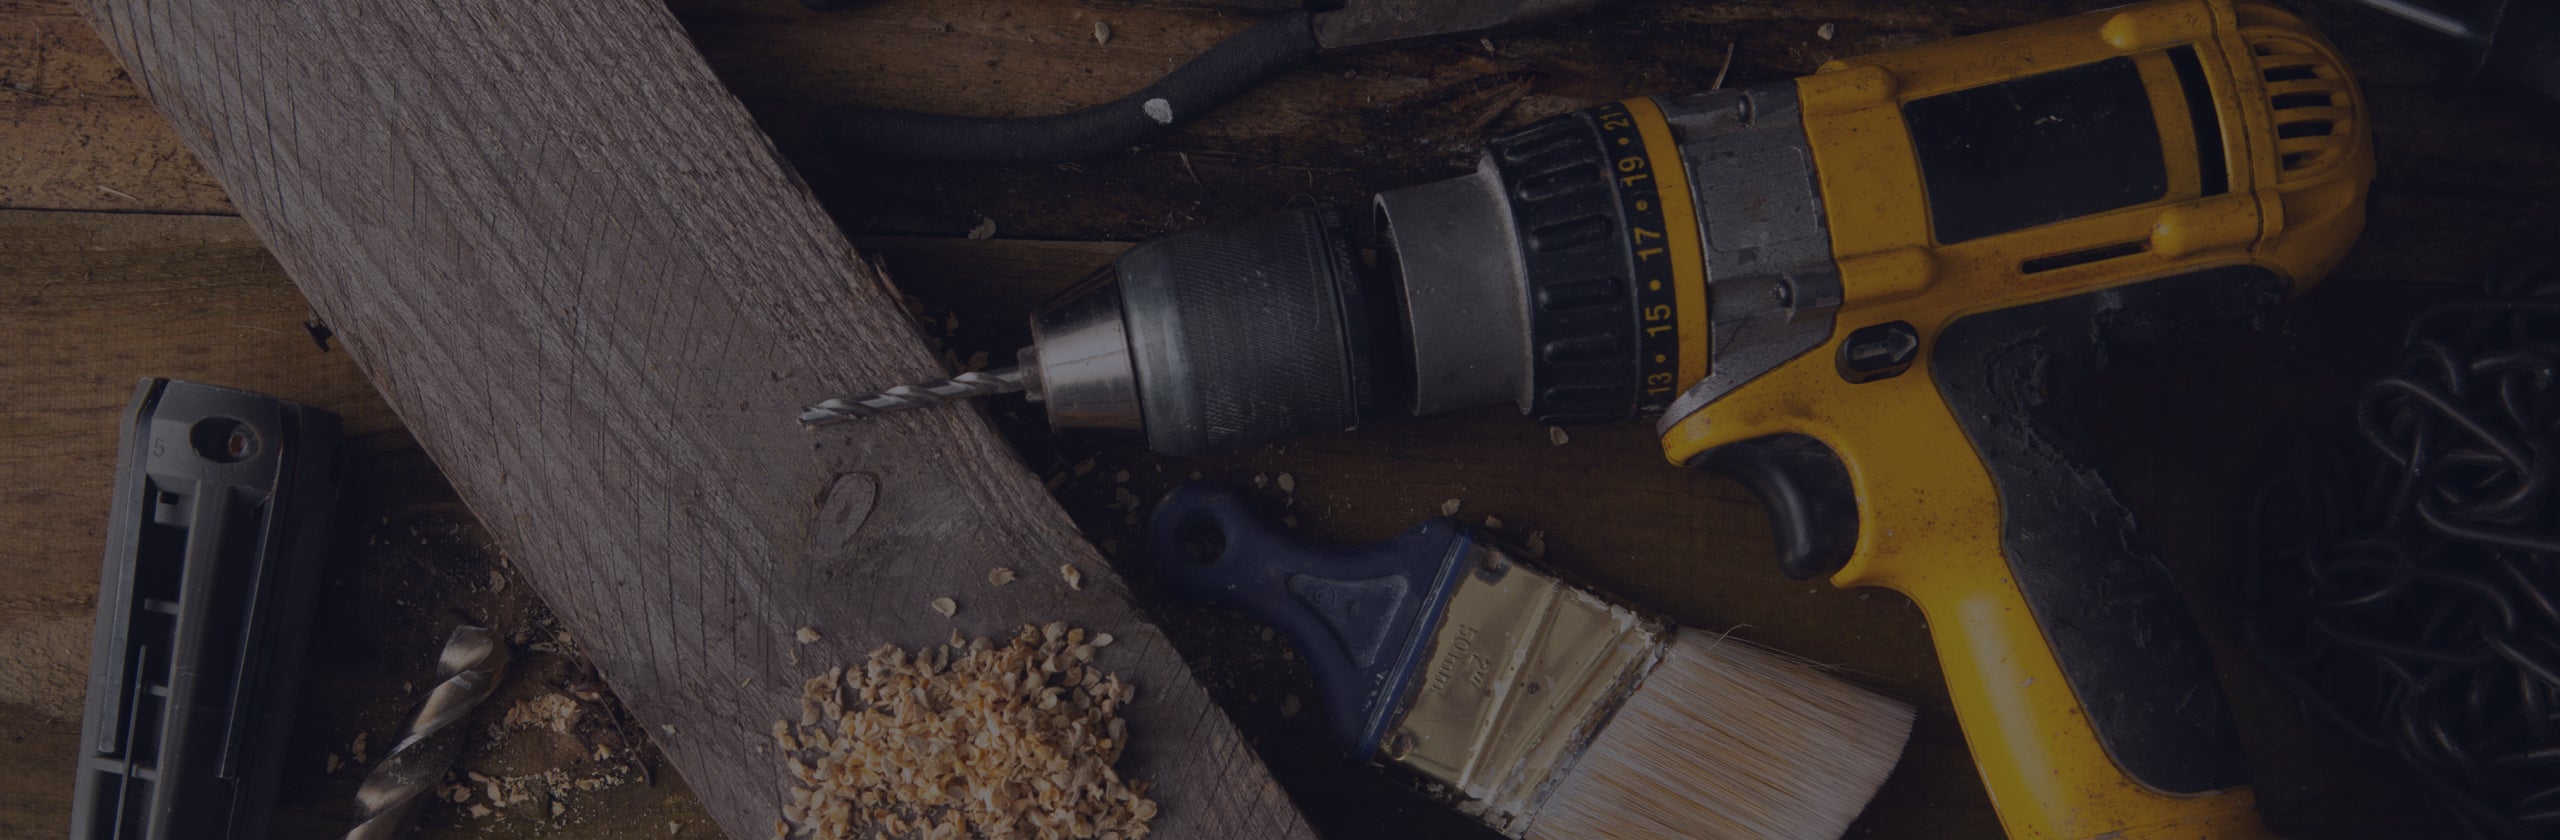 A background image featuring a drill, paint brush, wood and more tools